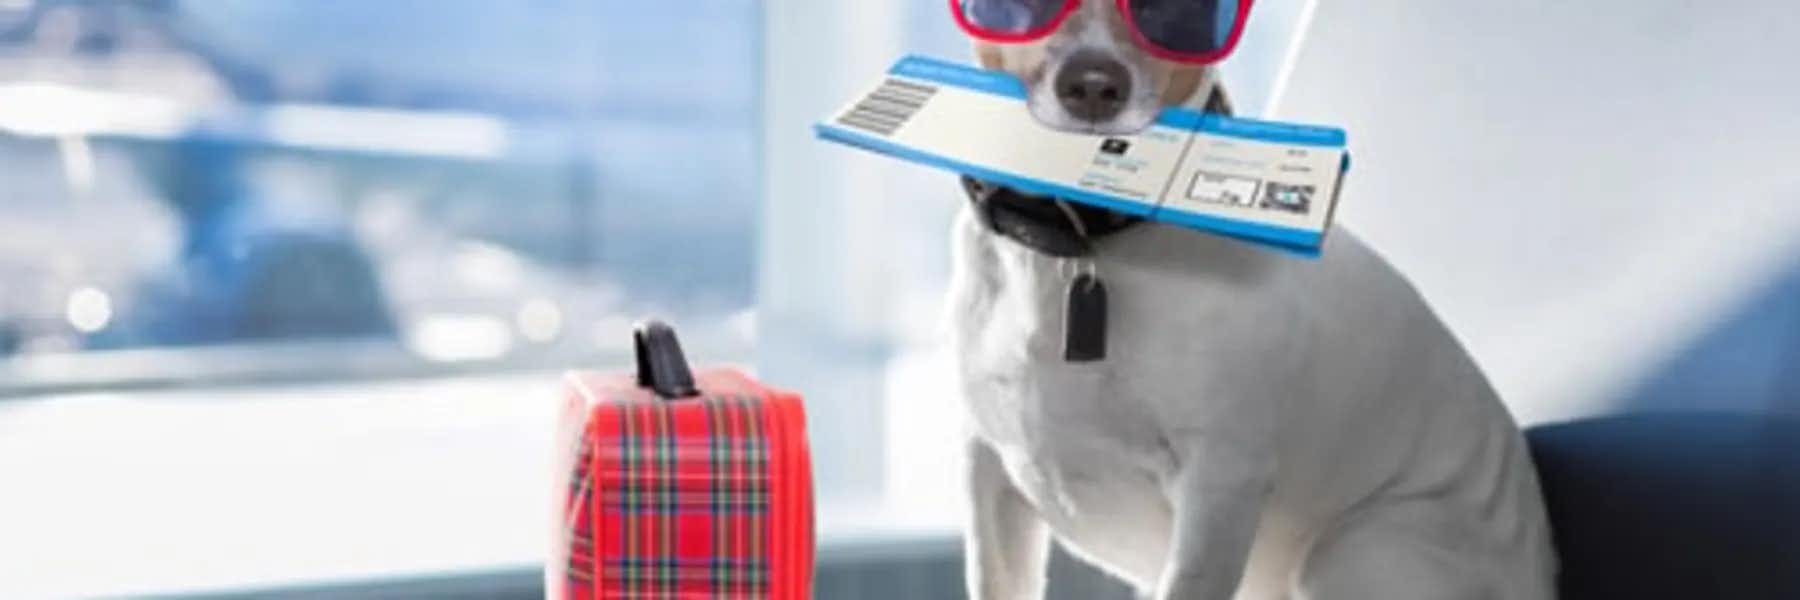 travel europe with your dog